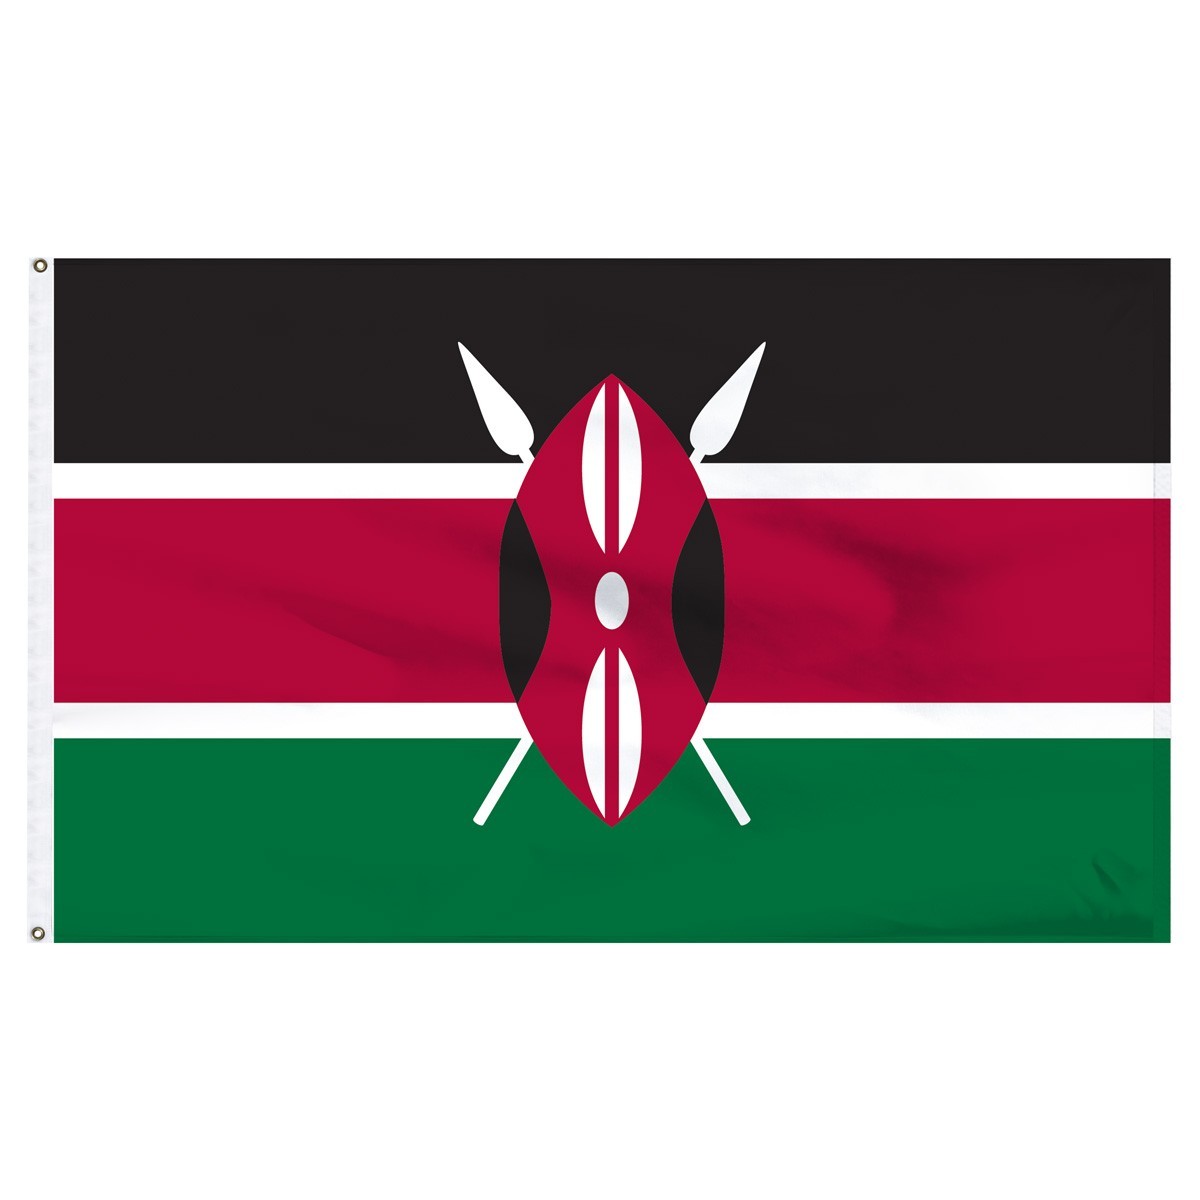 Shop high quality American made nylon flags, Kenya flag for sale from 1-800 Flags